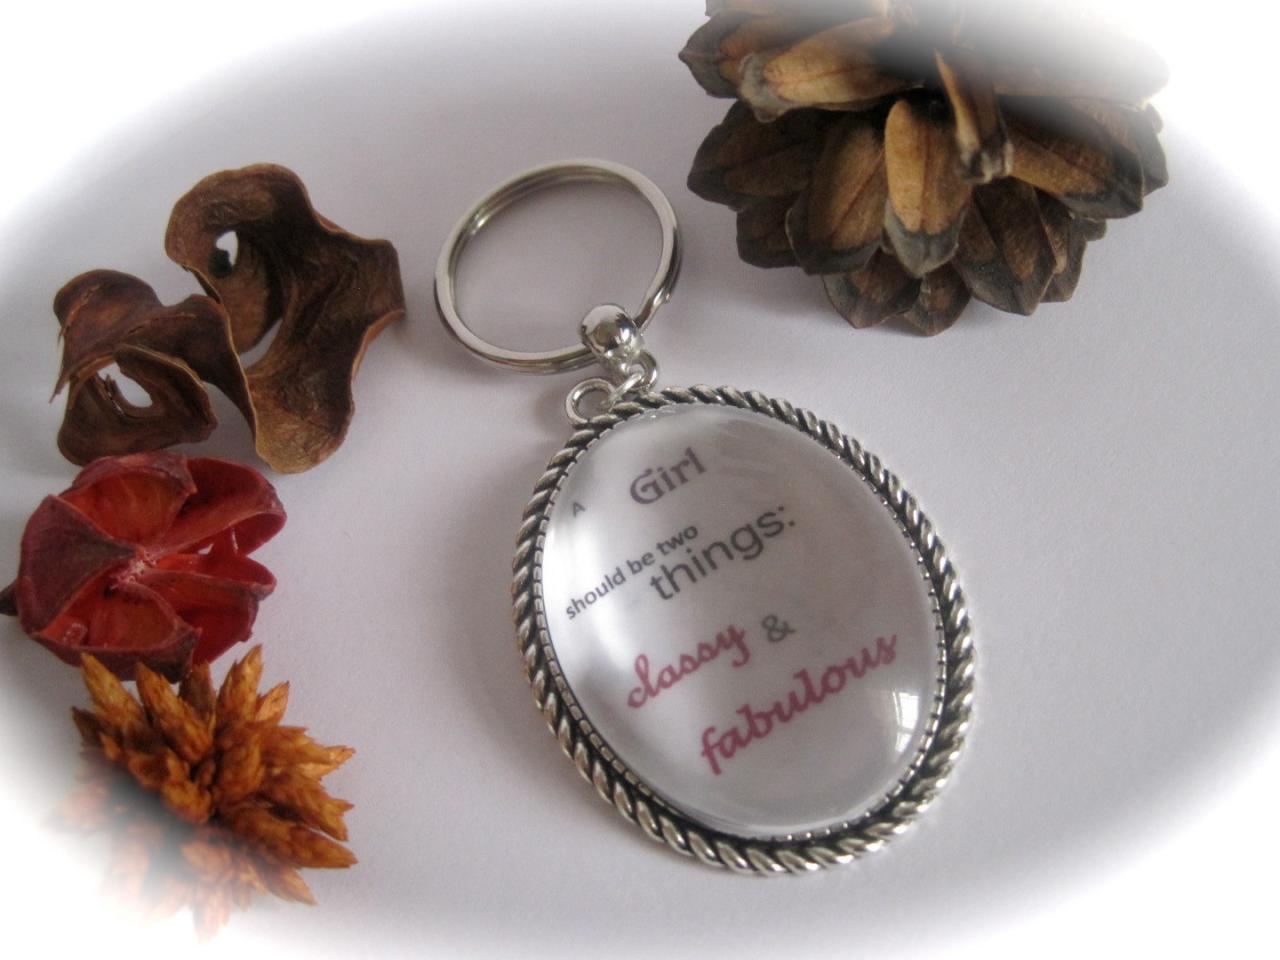 Quotation Keyring - A Girl Should Be Two Things: Classy And Fabulous